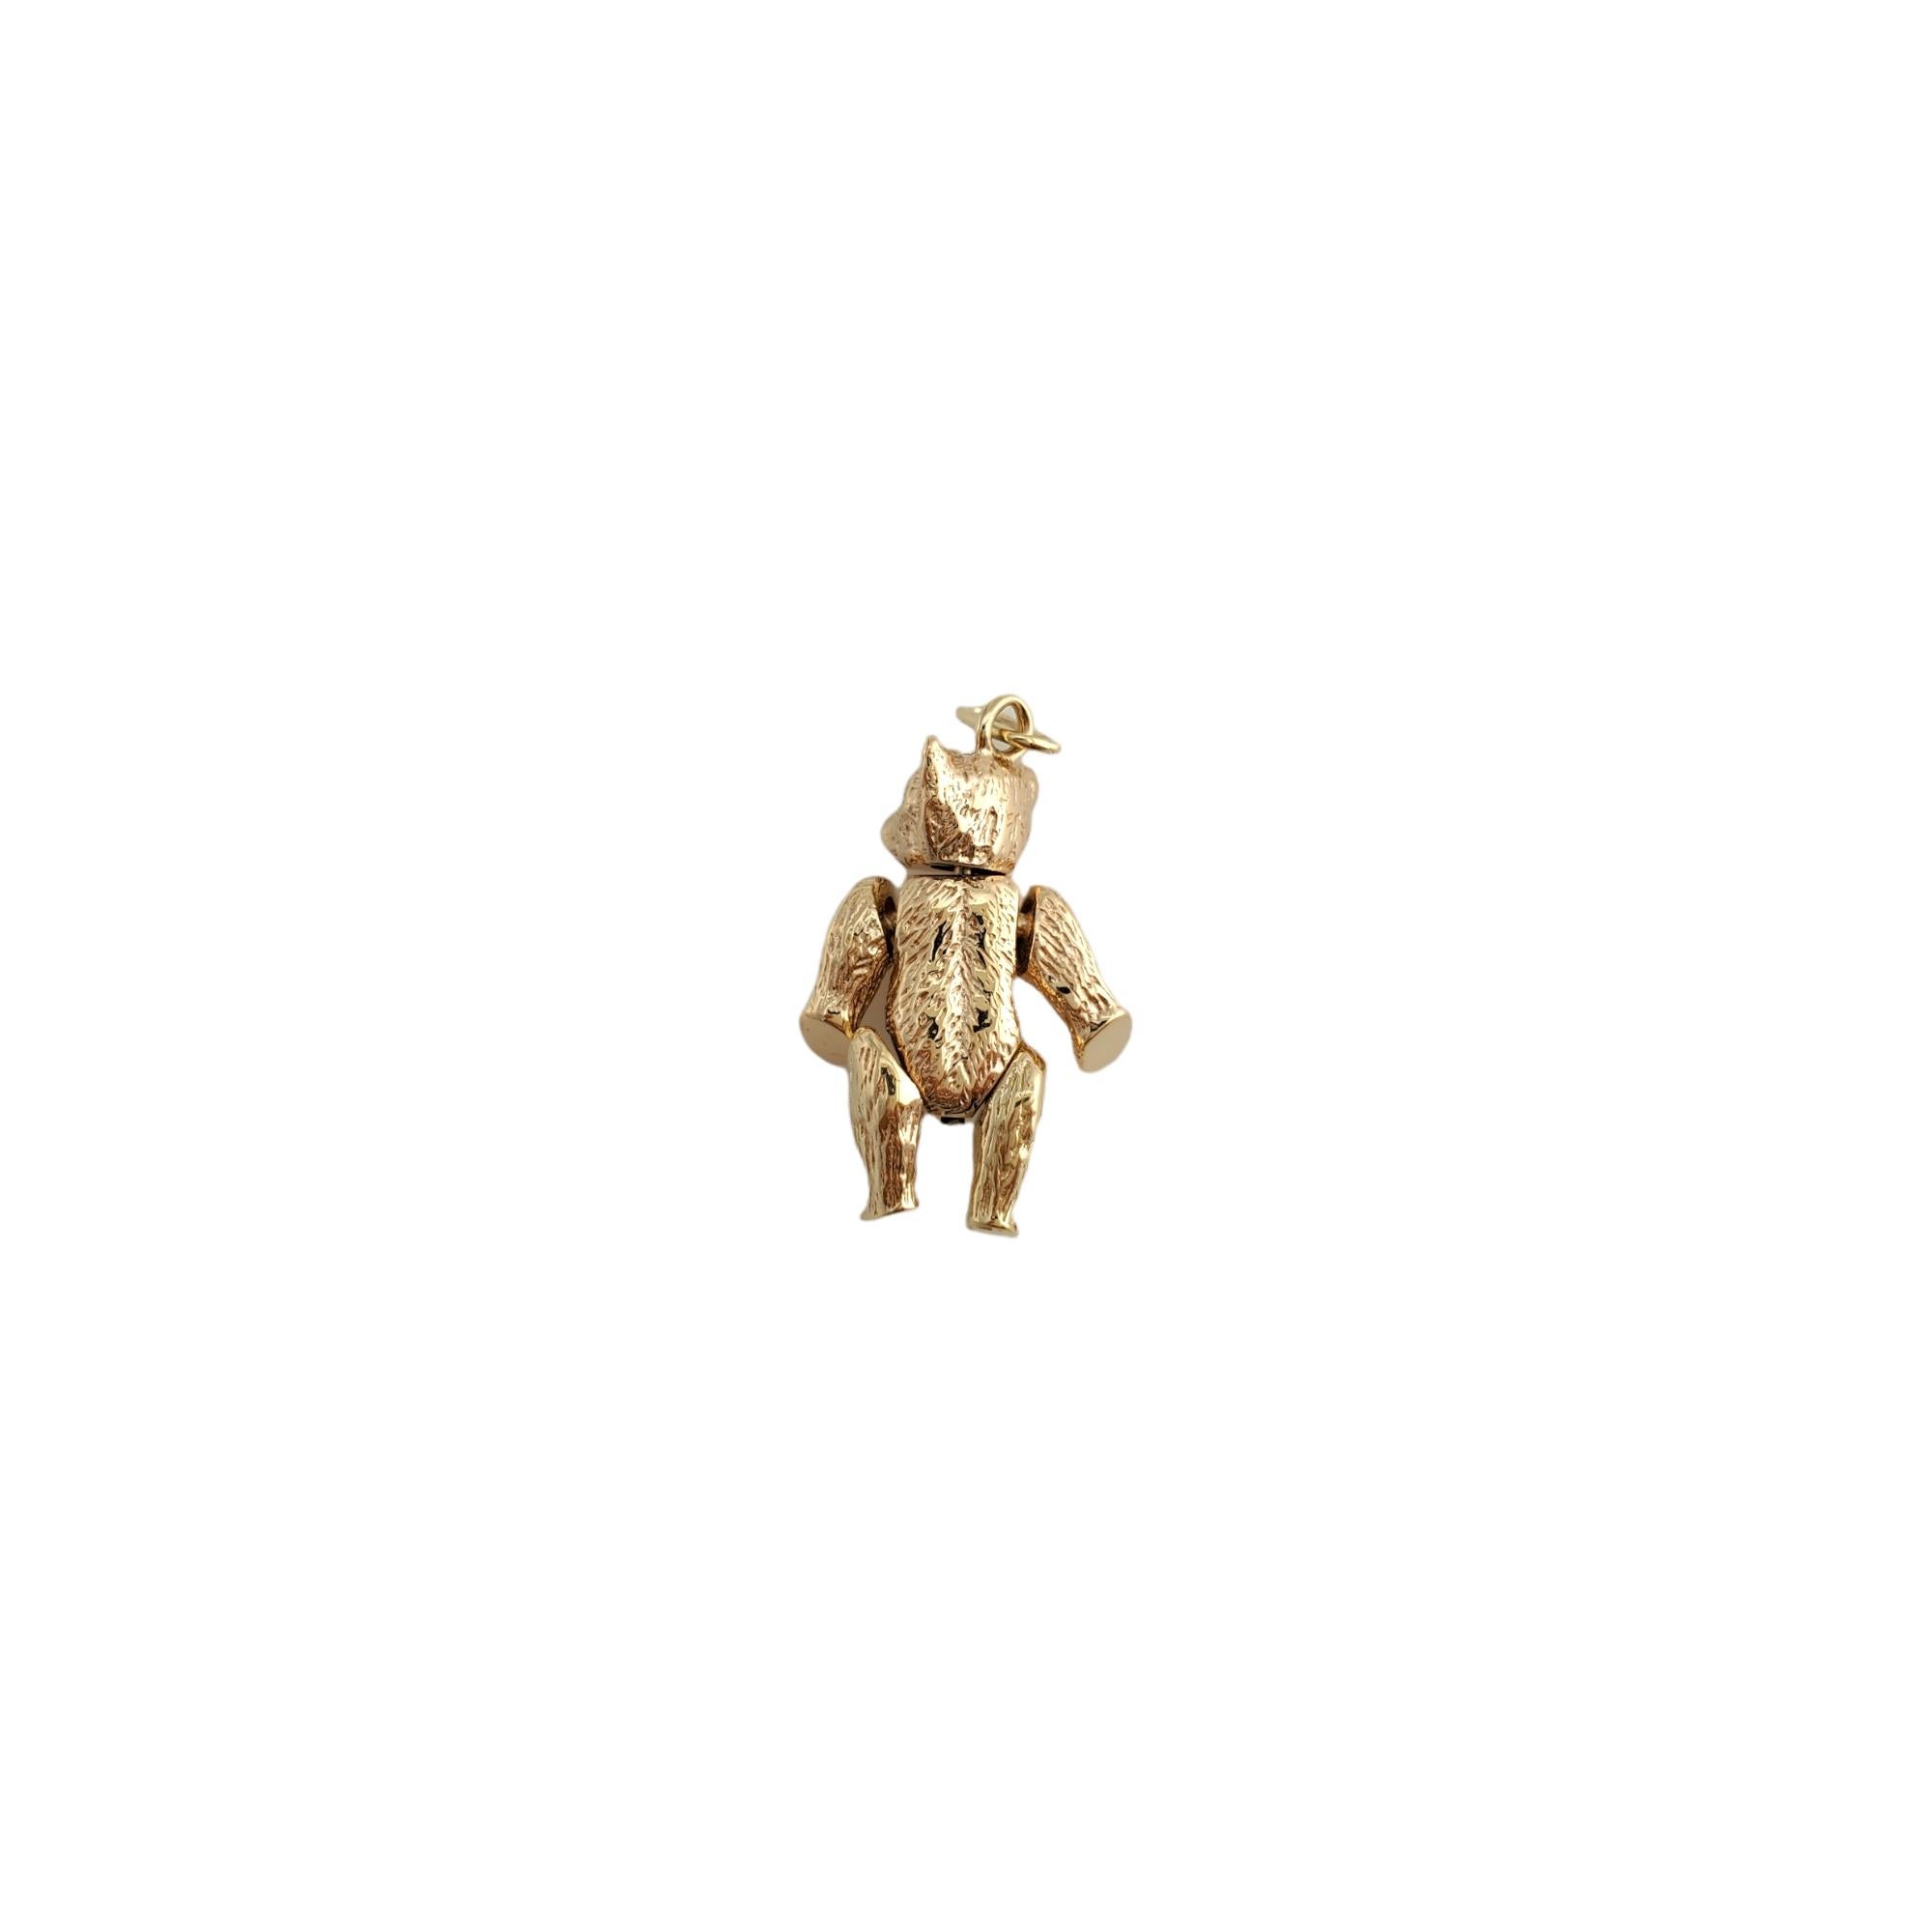 14K Yellow Gold Teddy Bear Charm

This lovely charm features a teddy bear figure with articulating legs and arms.

Size: 26.46 mm X 14.53 mm

Weight: 9.6 gr/ 6.1 dwt.

Hallmark: 14K

Very good condition, professionally polished.

Will come packaged